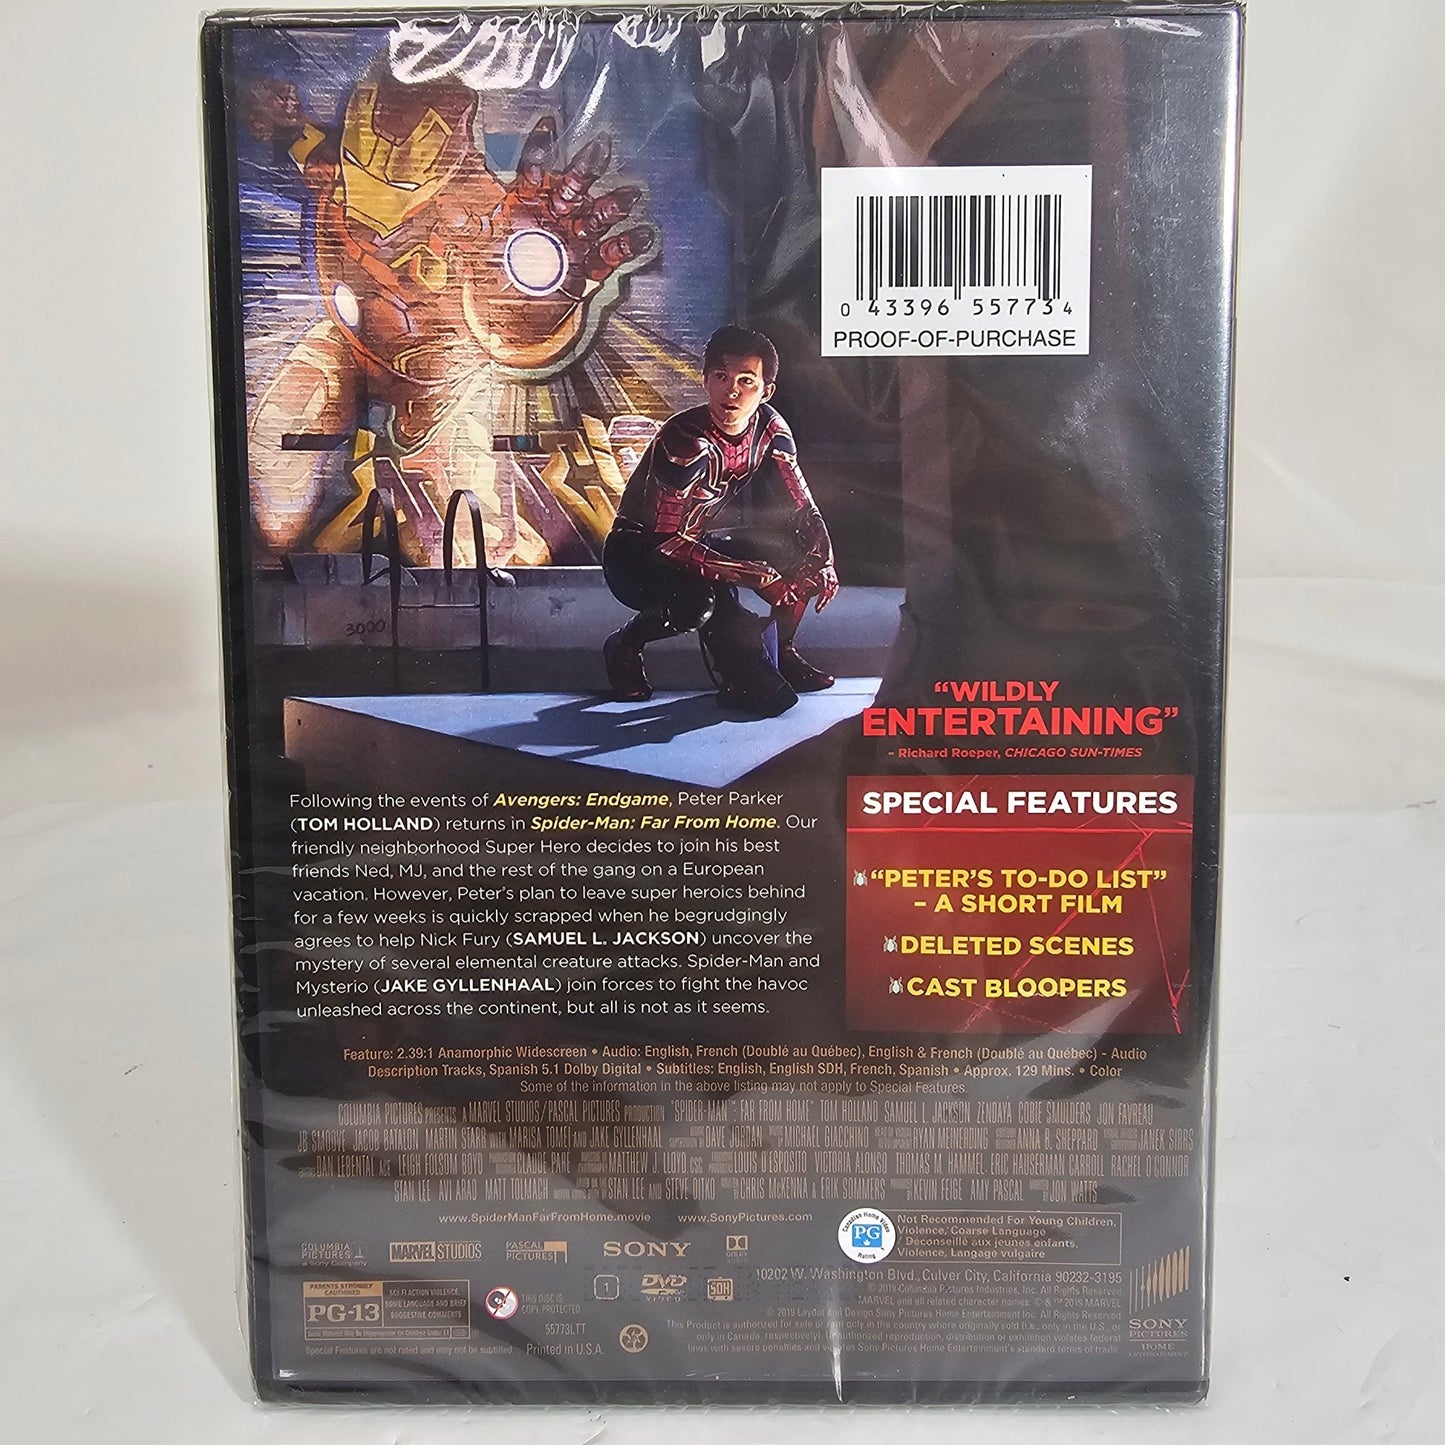 Spider-Man: Far from Home DVD - DQ Distribution